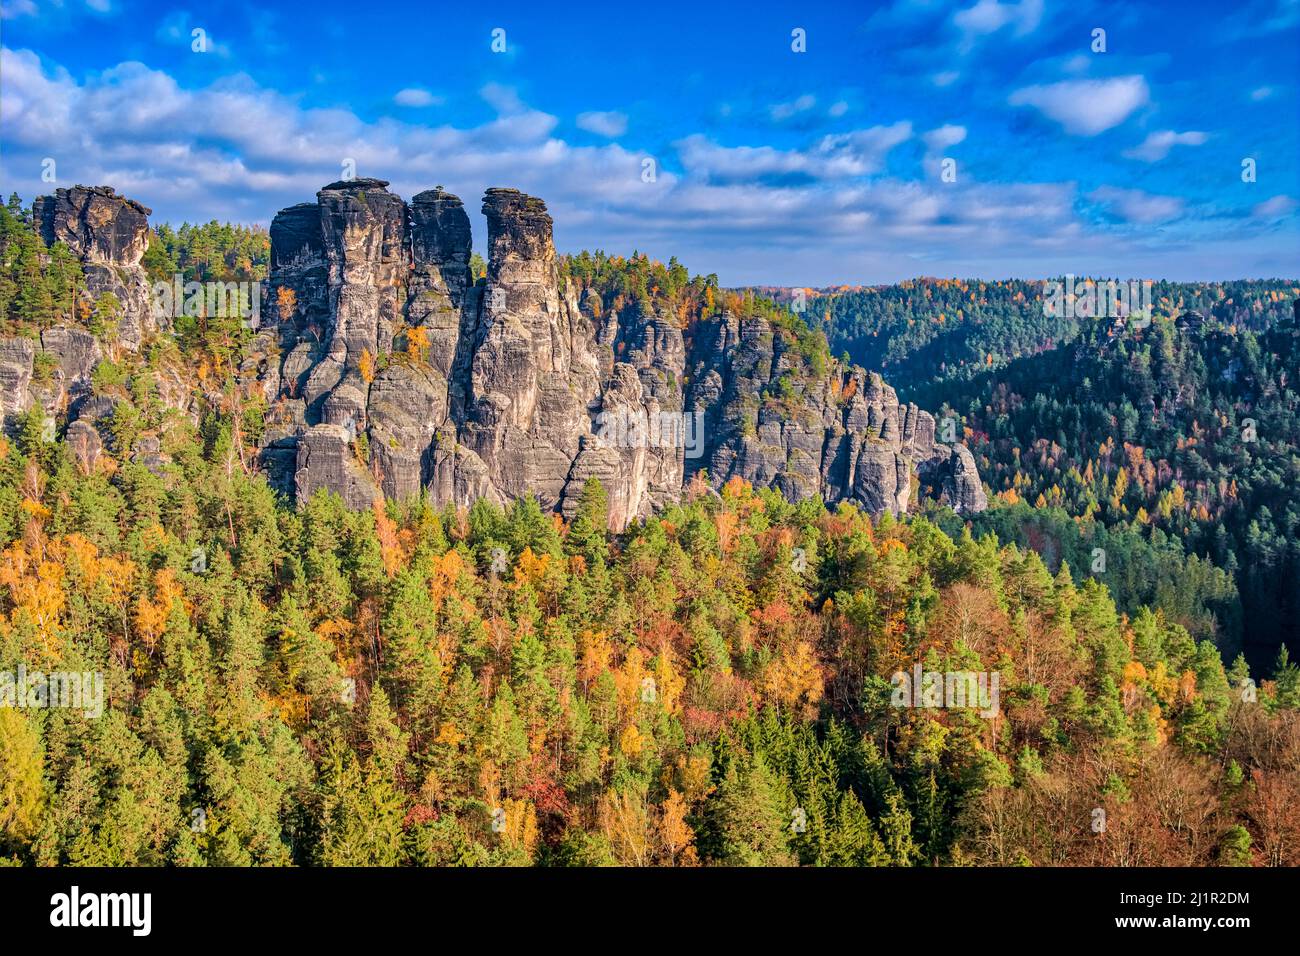 Landscape with rock formations, the summit Hintere Gans and colorful trees in Rathen area of the Saxon Switzerland National Park in autumn. Stock Photo